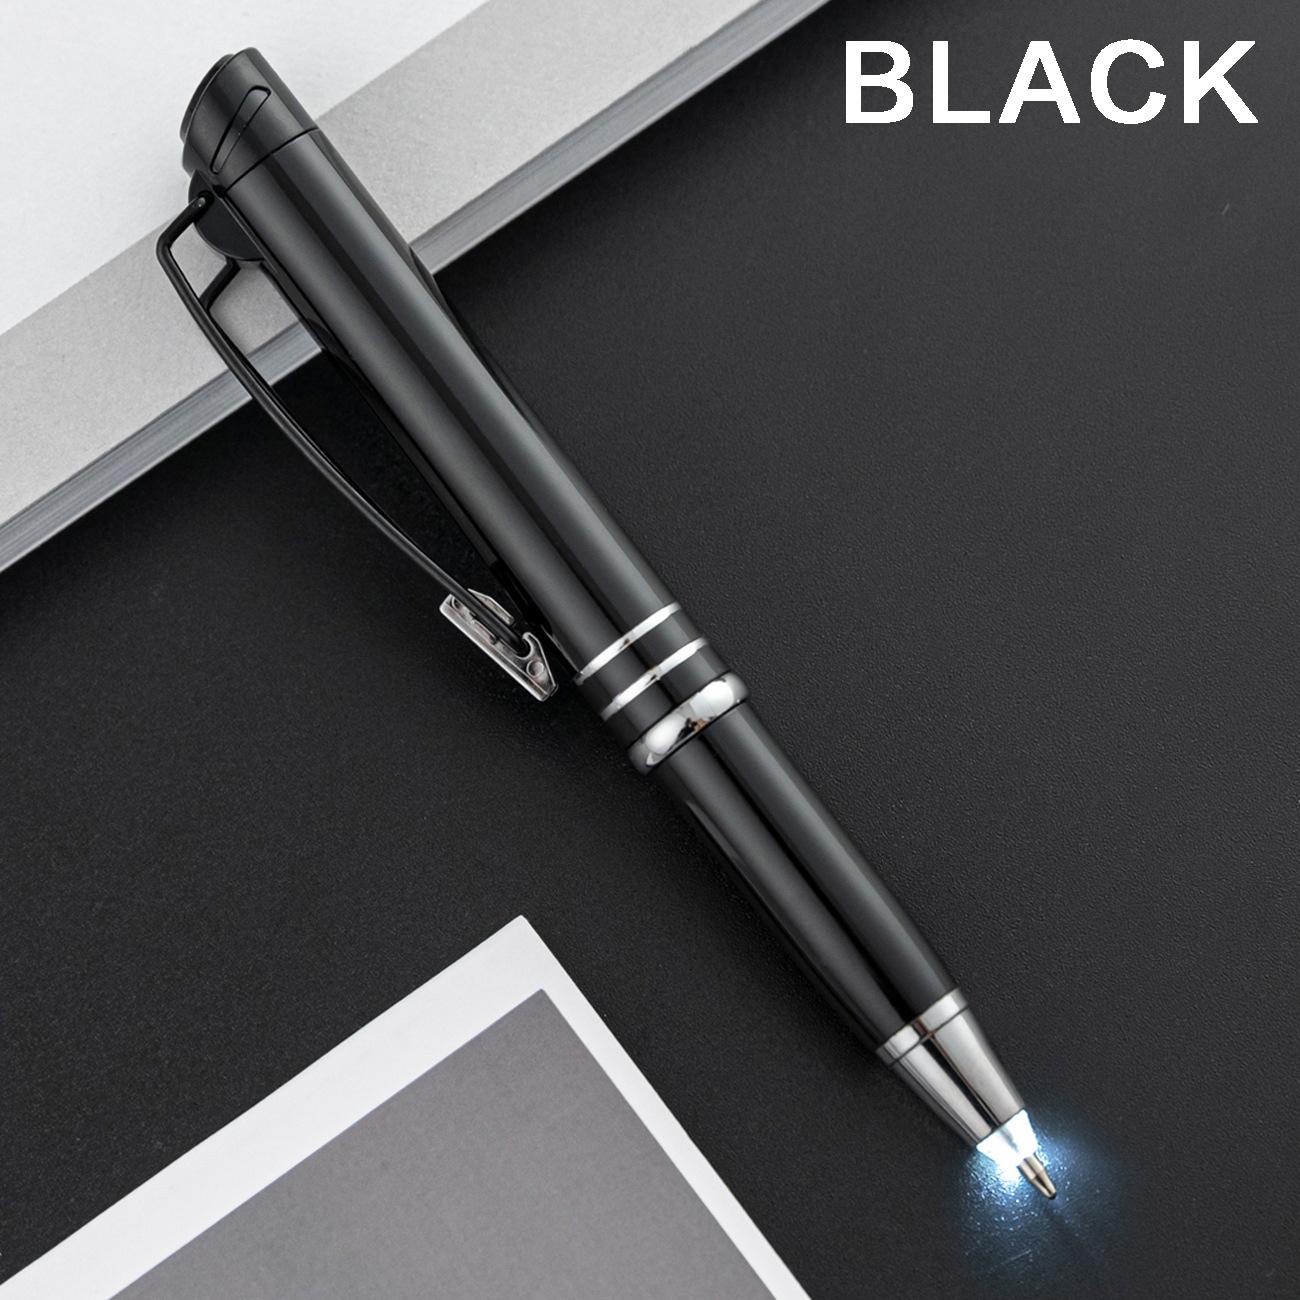 5pcs Different Color Pens For Note Taking, Ballpoint Pen Tip, Pen Holder  Type, For Phone Tablet Computer Capacitive, Office Stylus, Black Ink, Smart